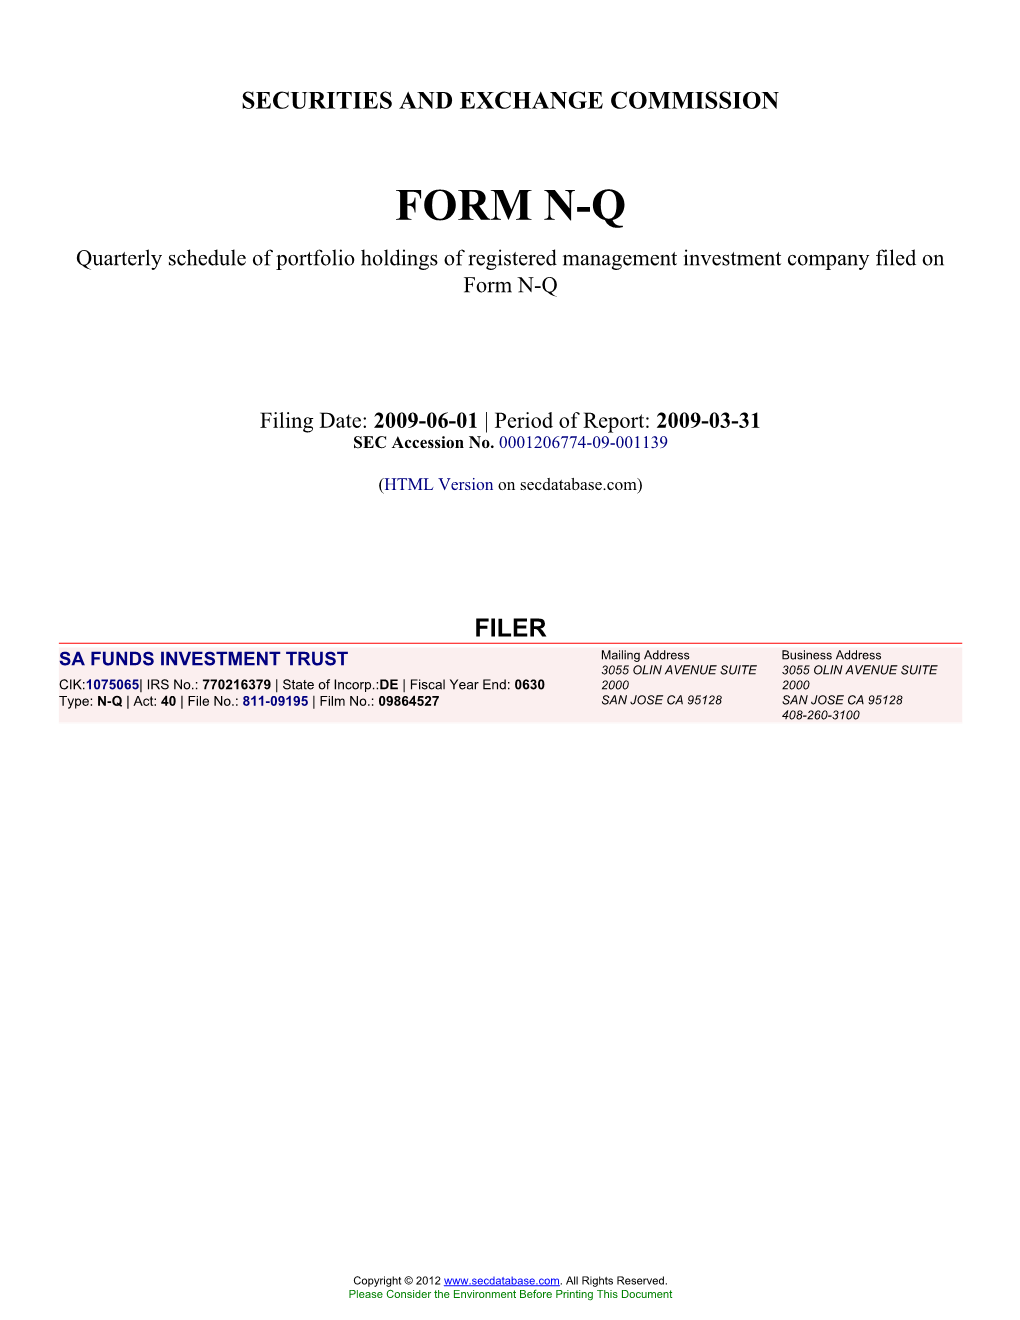 SA FUNDS INVESTMENT TRUST (Form: N-Q, Filing Date: 06/01/2009)